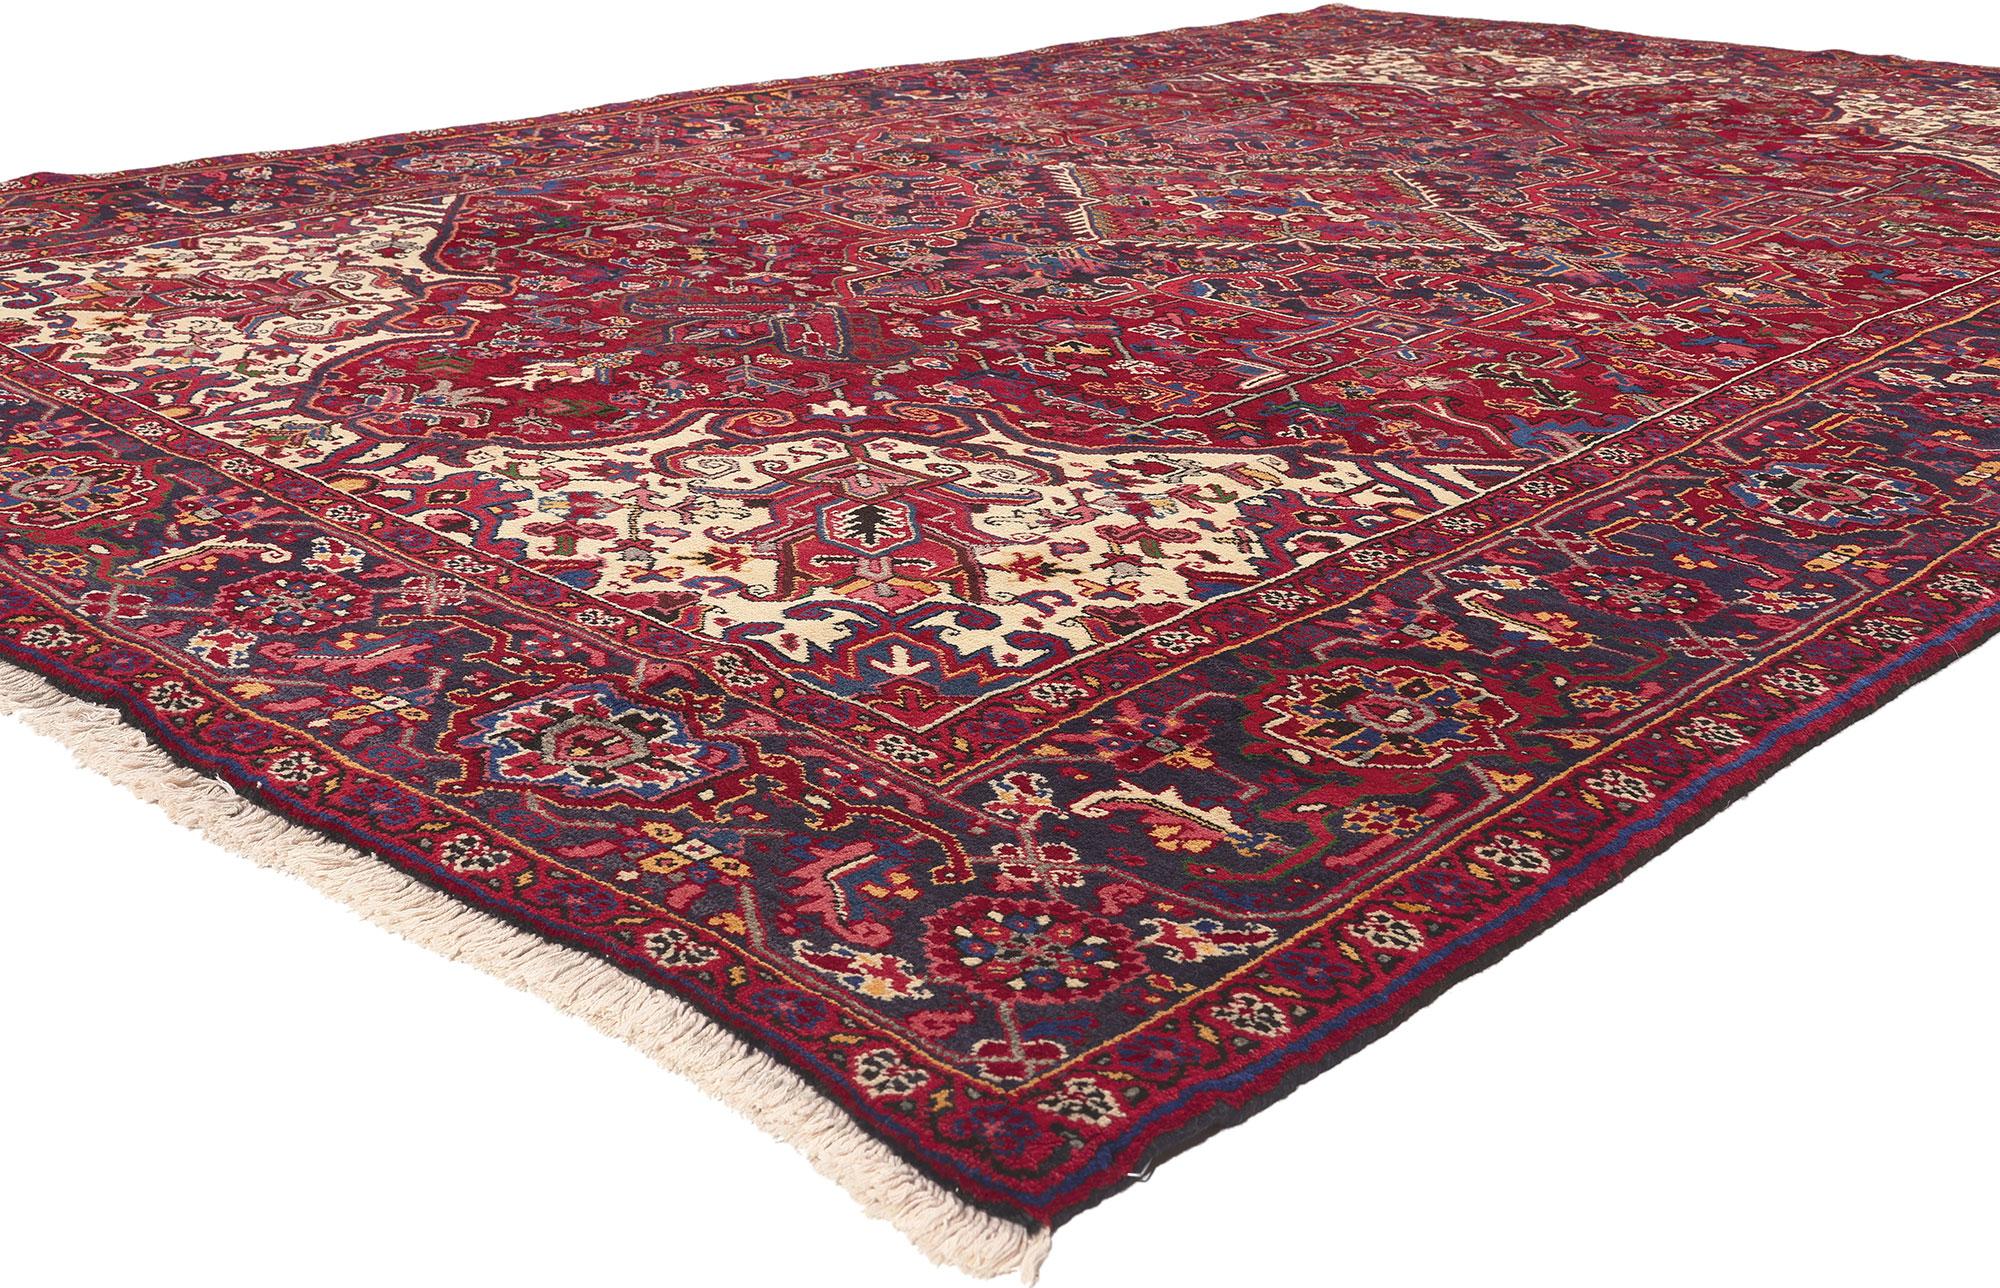 76163 Vintage Persian Heriz Rug, 07'10 x 11'04.
Classic elegance meets effortlessly chic in this hand knotted wool vintage Persian Heriz rug. The highly decorative design and sophisticated color palette woven into this piece work together creating a